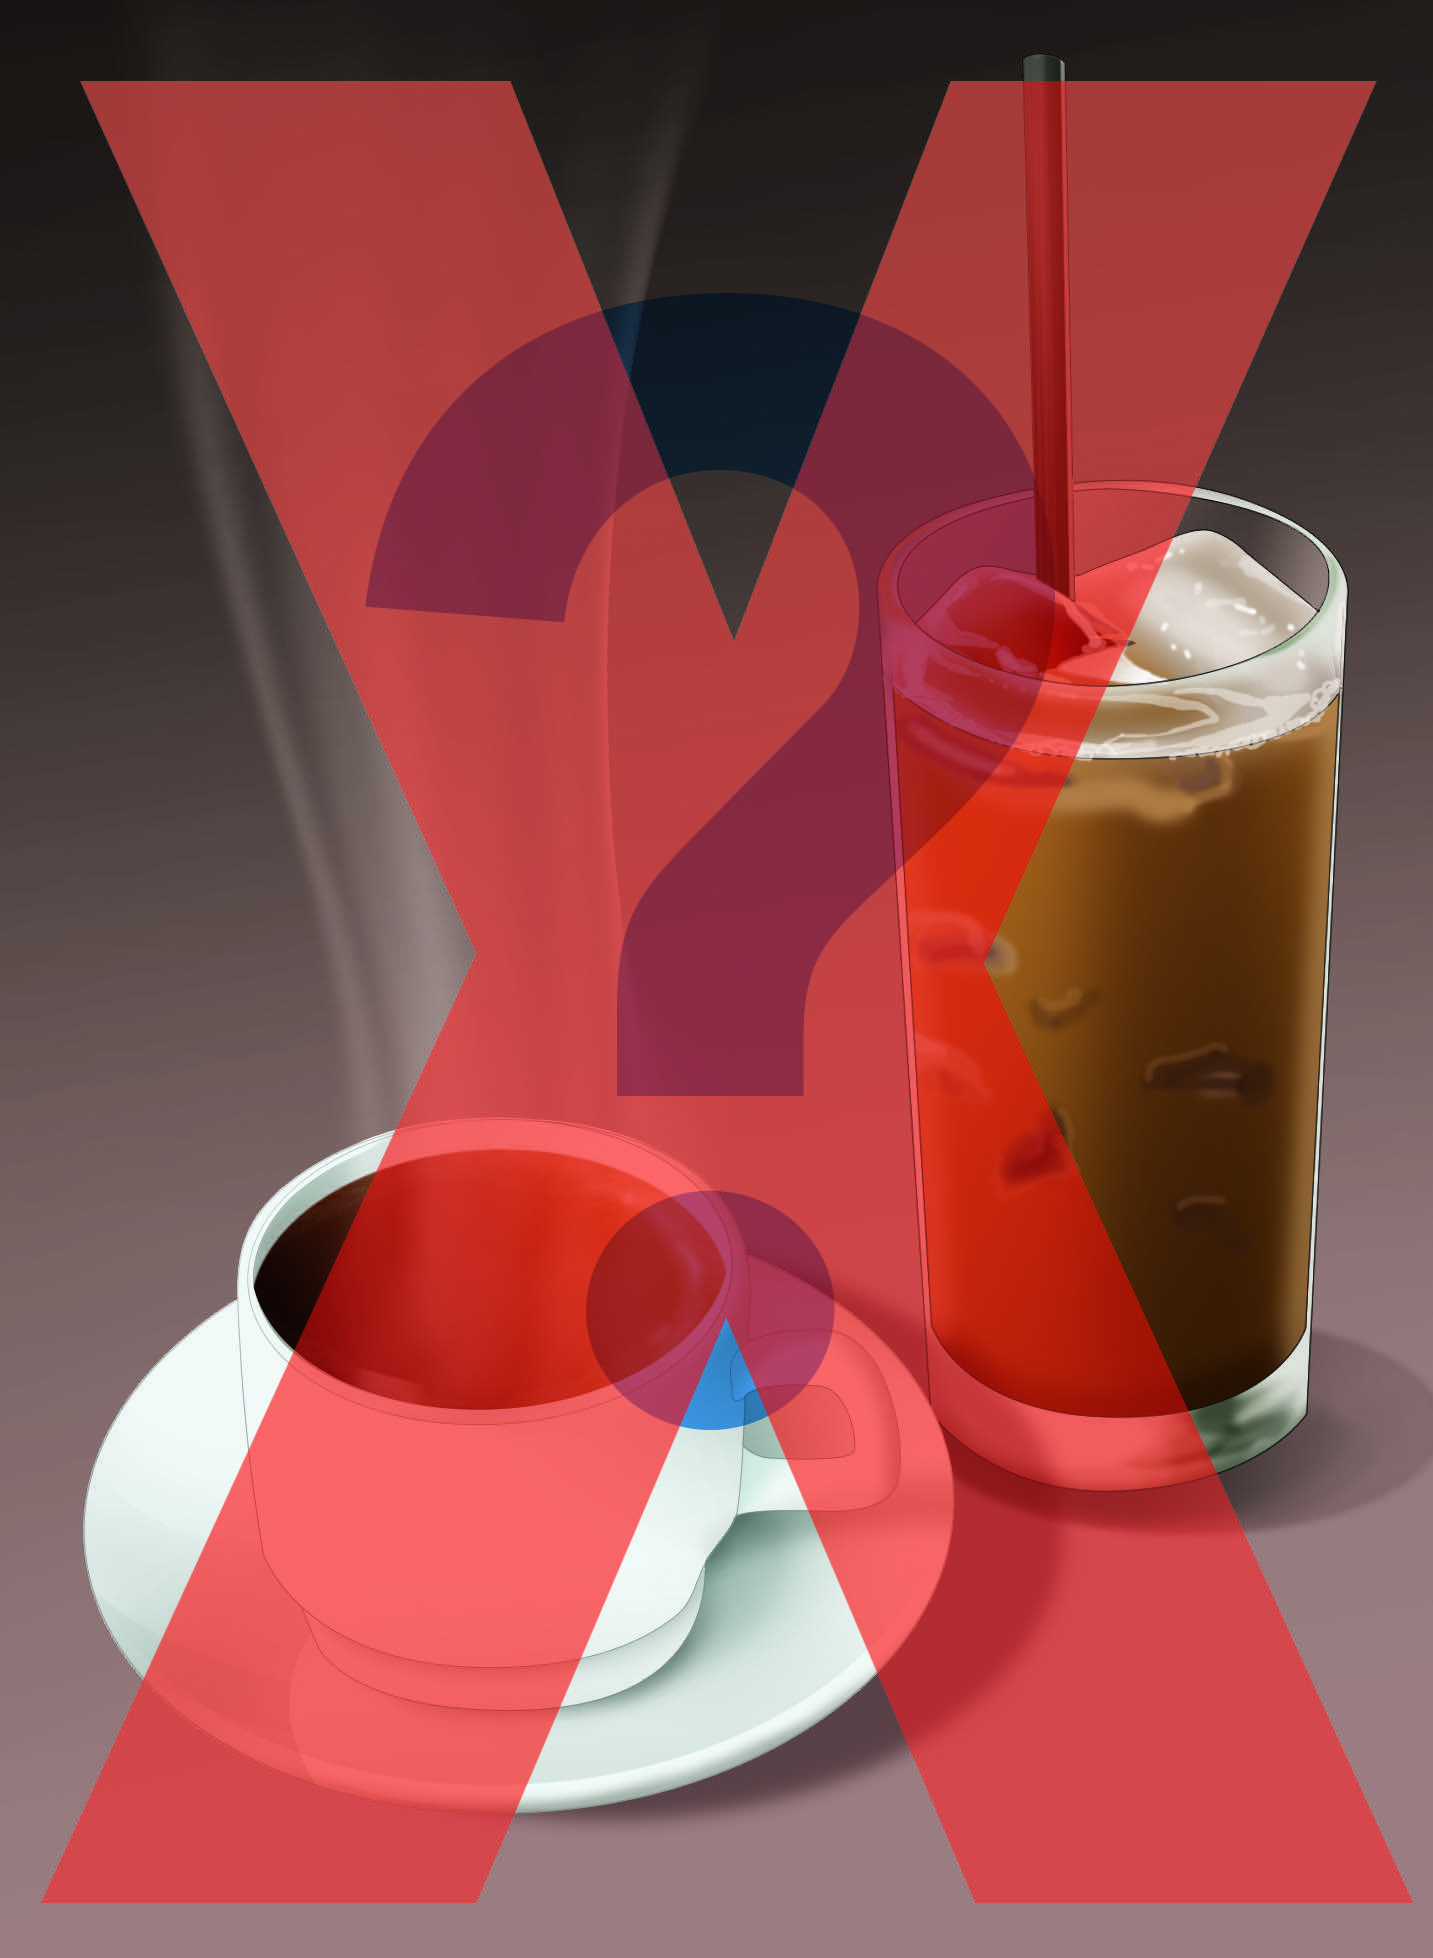 Drawing of iced coffee, question mark, and hot coffee all crossed out with large red X.